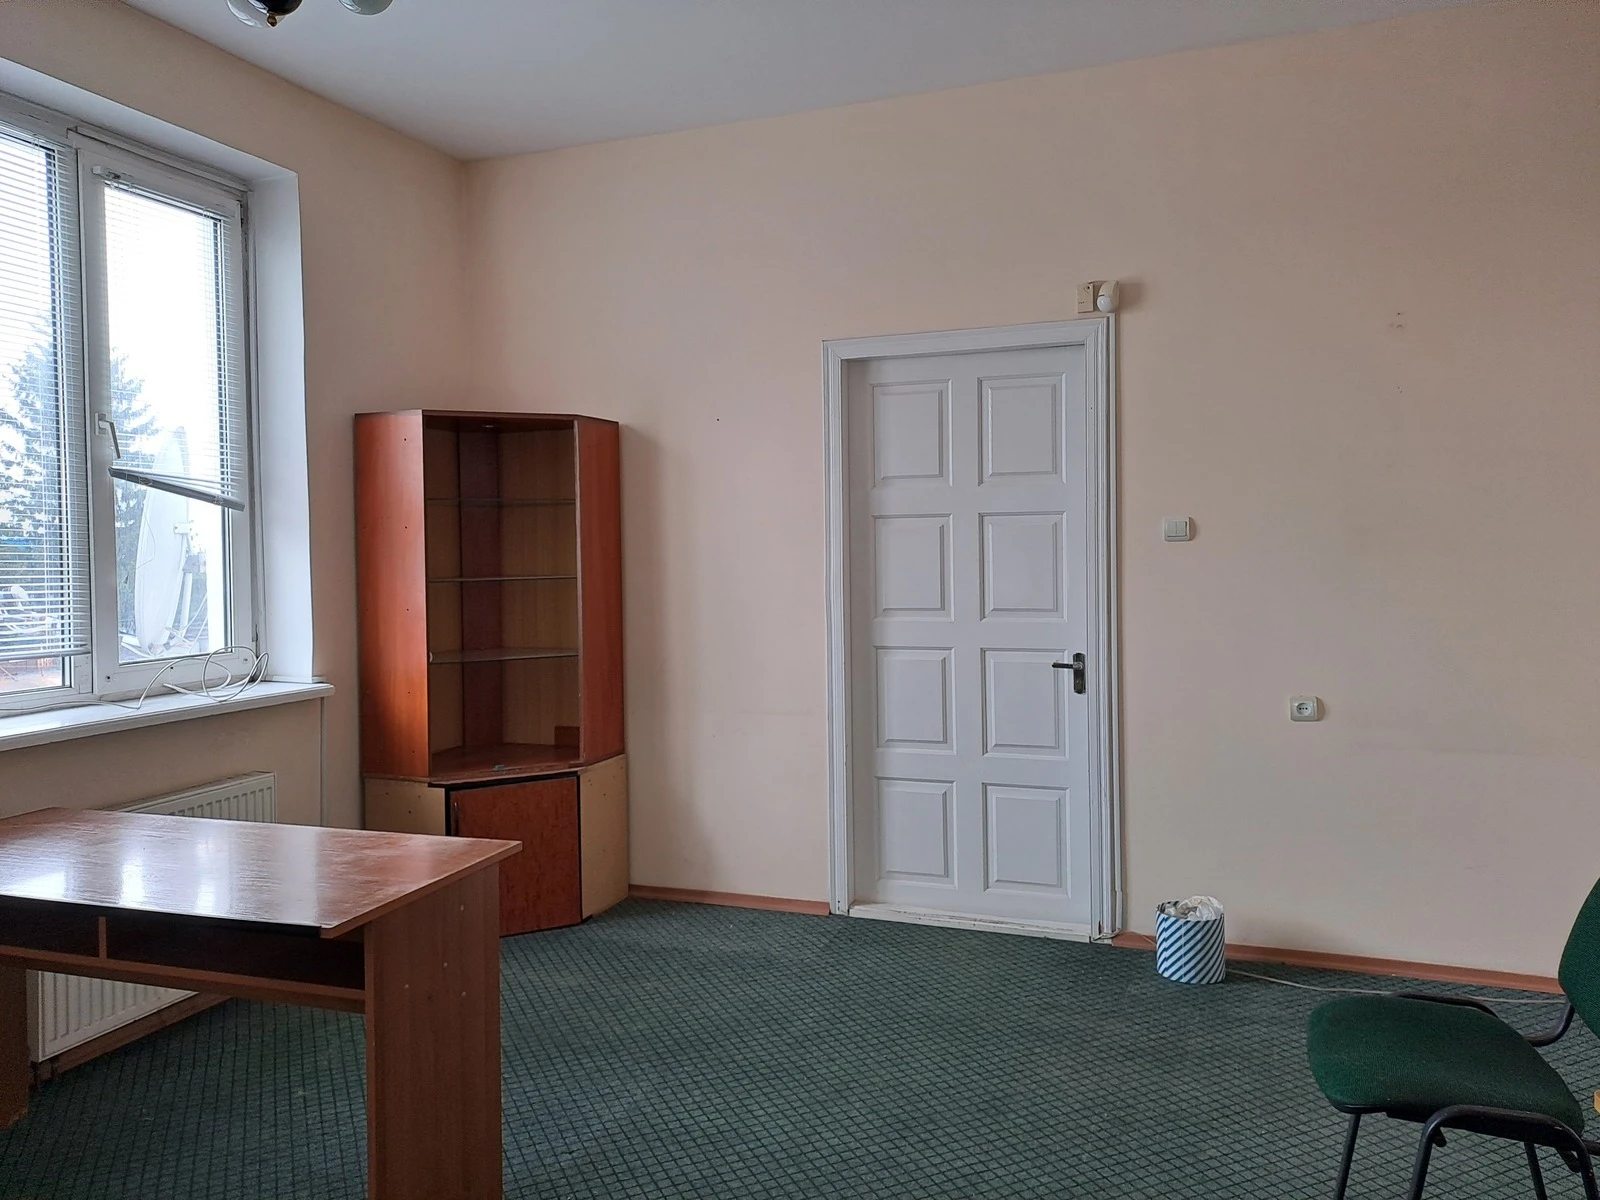 Real estate for sale for commercial purposes. 39 m², 2nd floor/4 floors. Druzhba, Ternopil. 